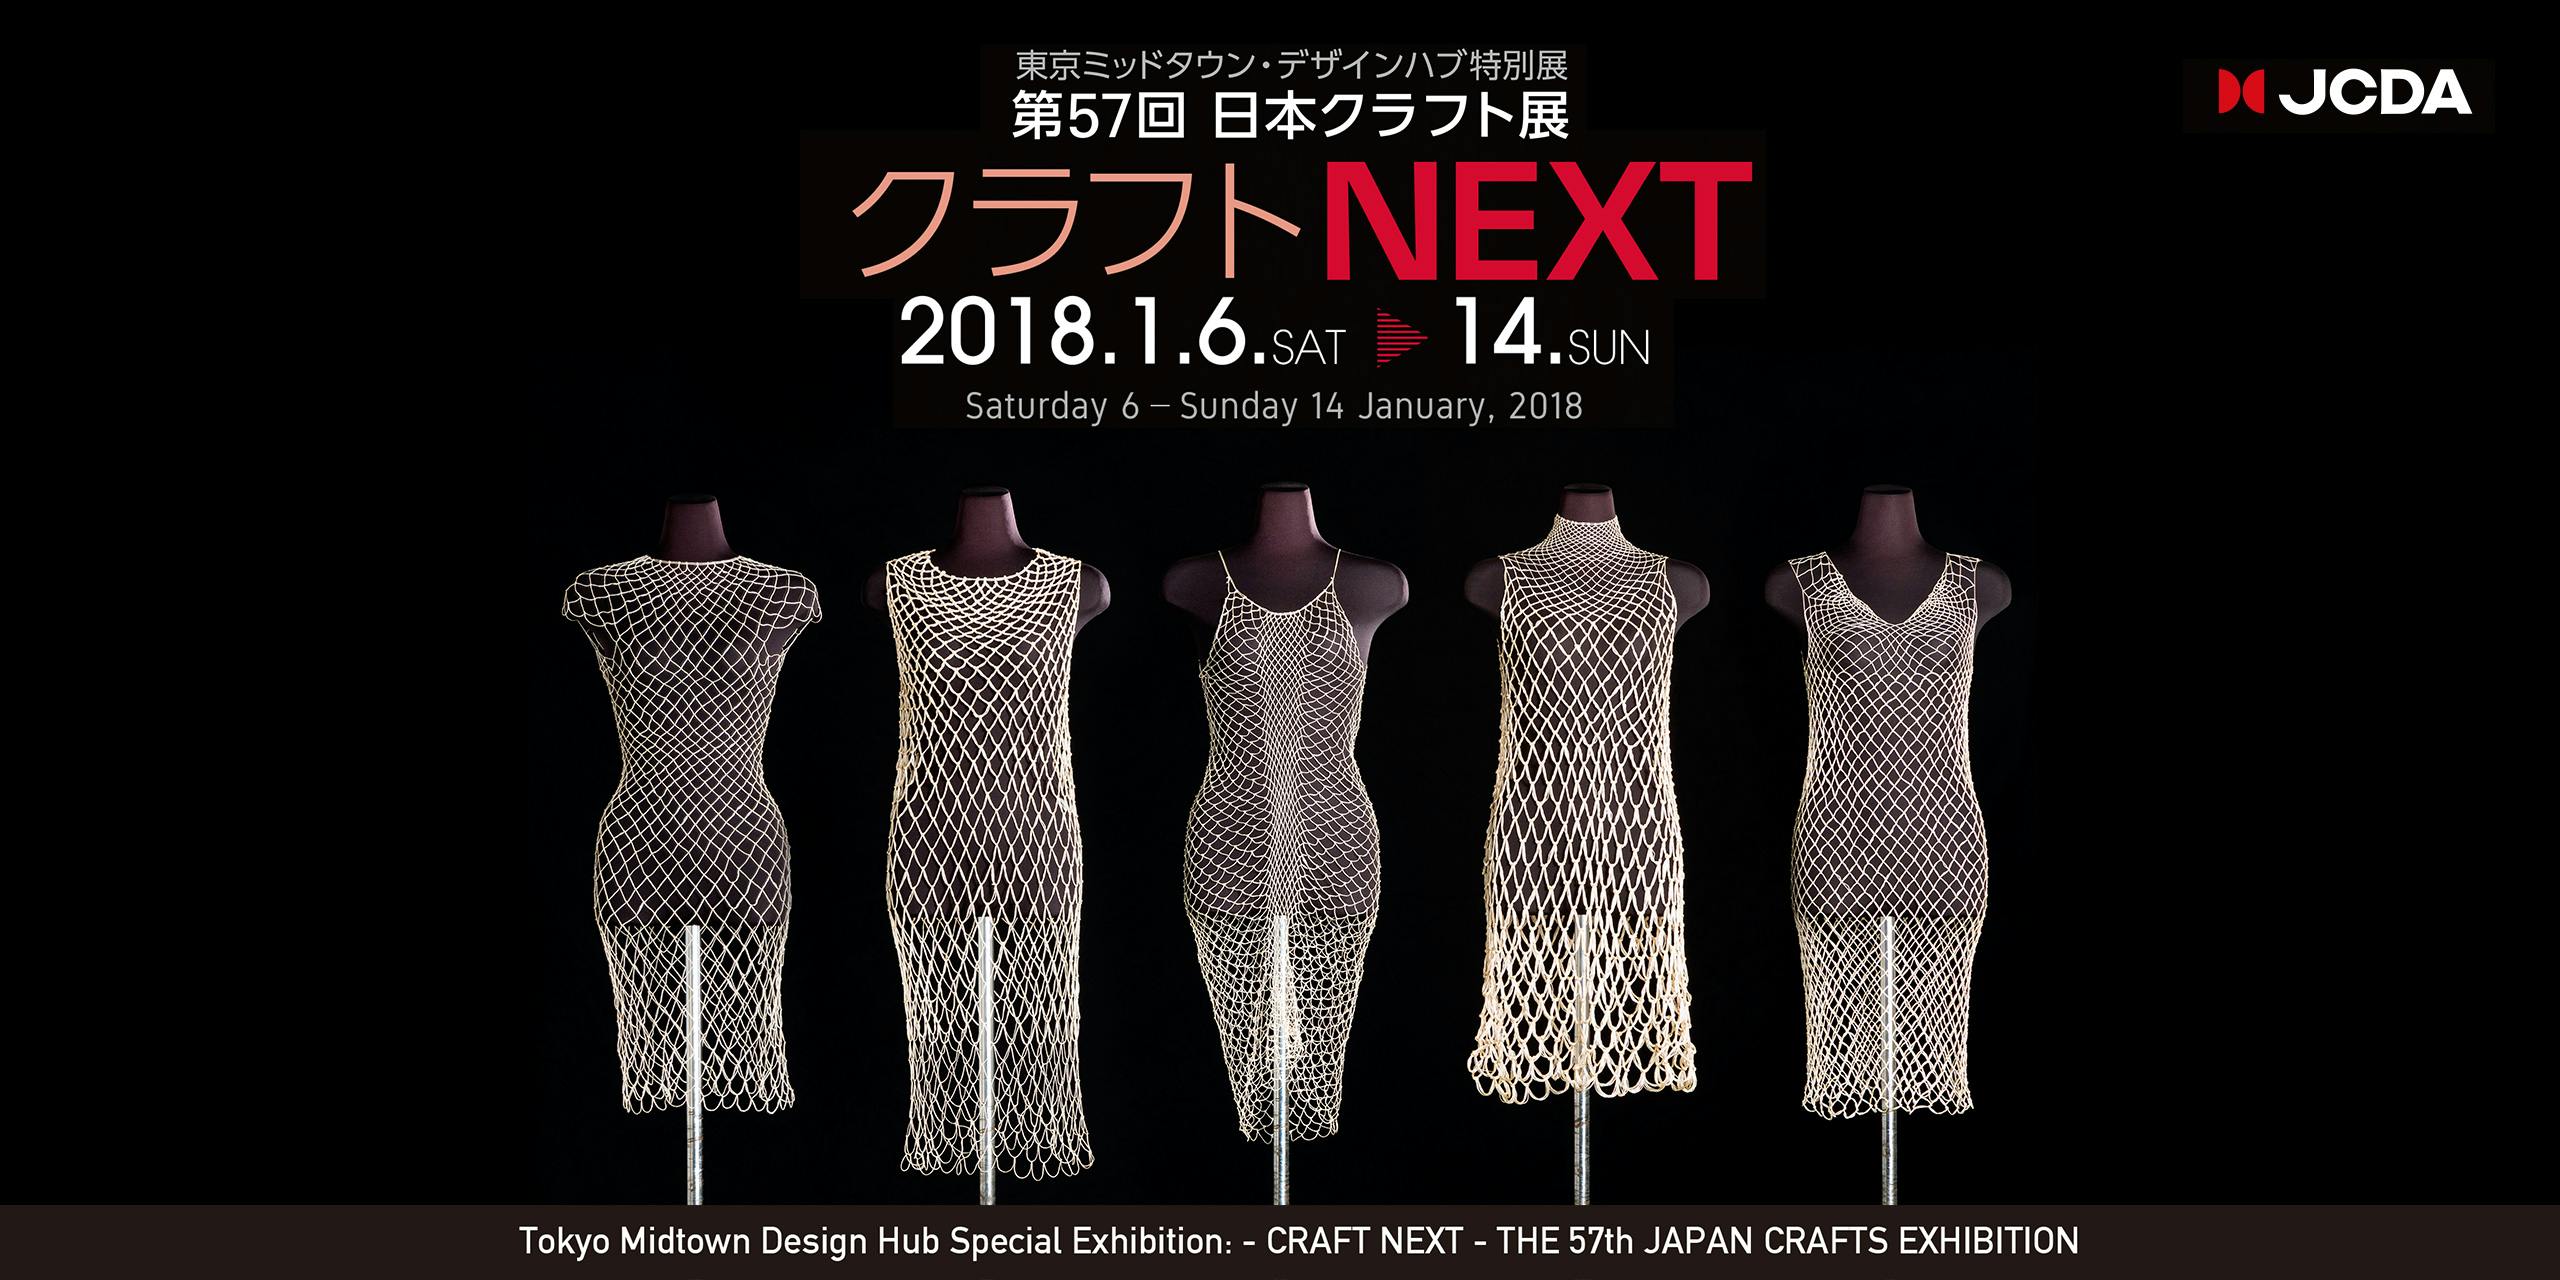 - CRAFT NEXT - THE 57th JAPAN CRAFTS EXHIBITION